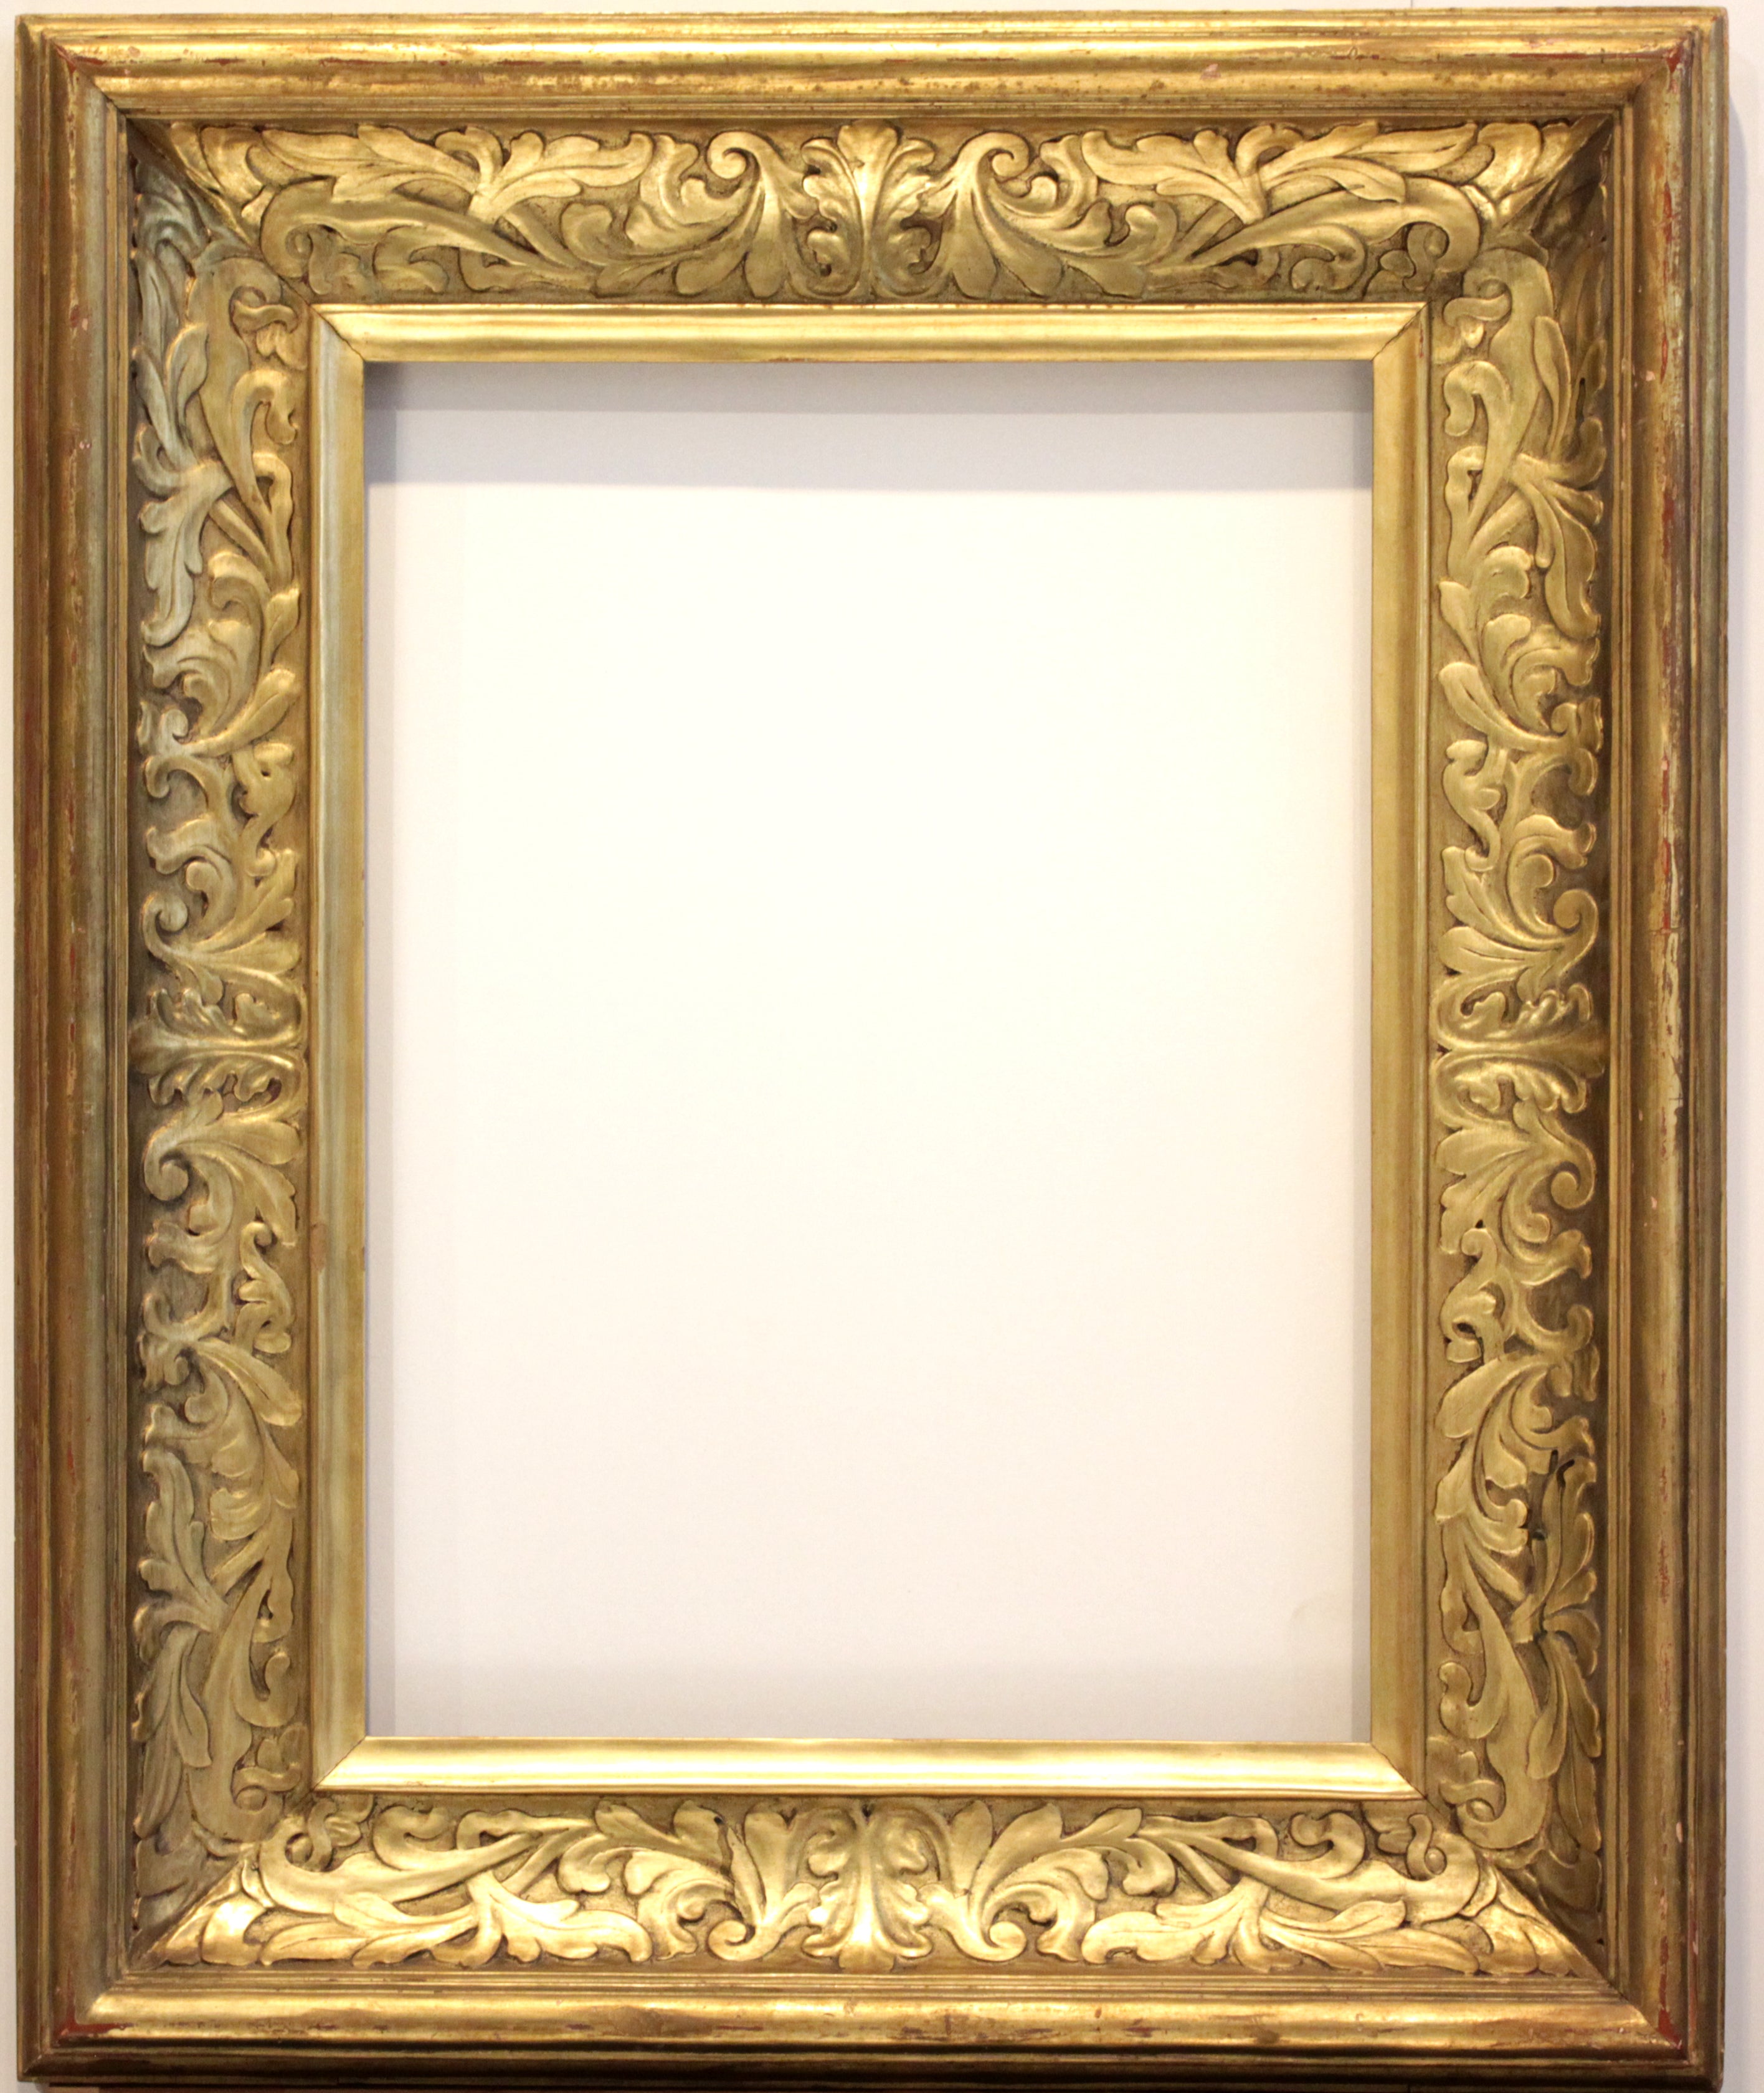 c. 1910-20 American Foster Bros. Arts and Crafts frame, gilded hand-carved wood. For Sale